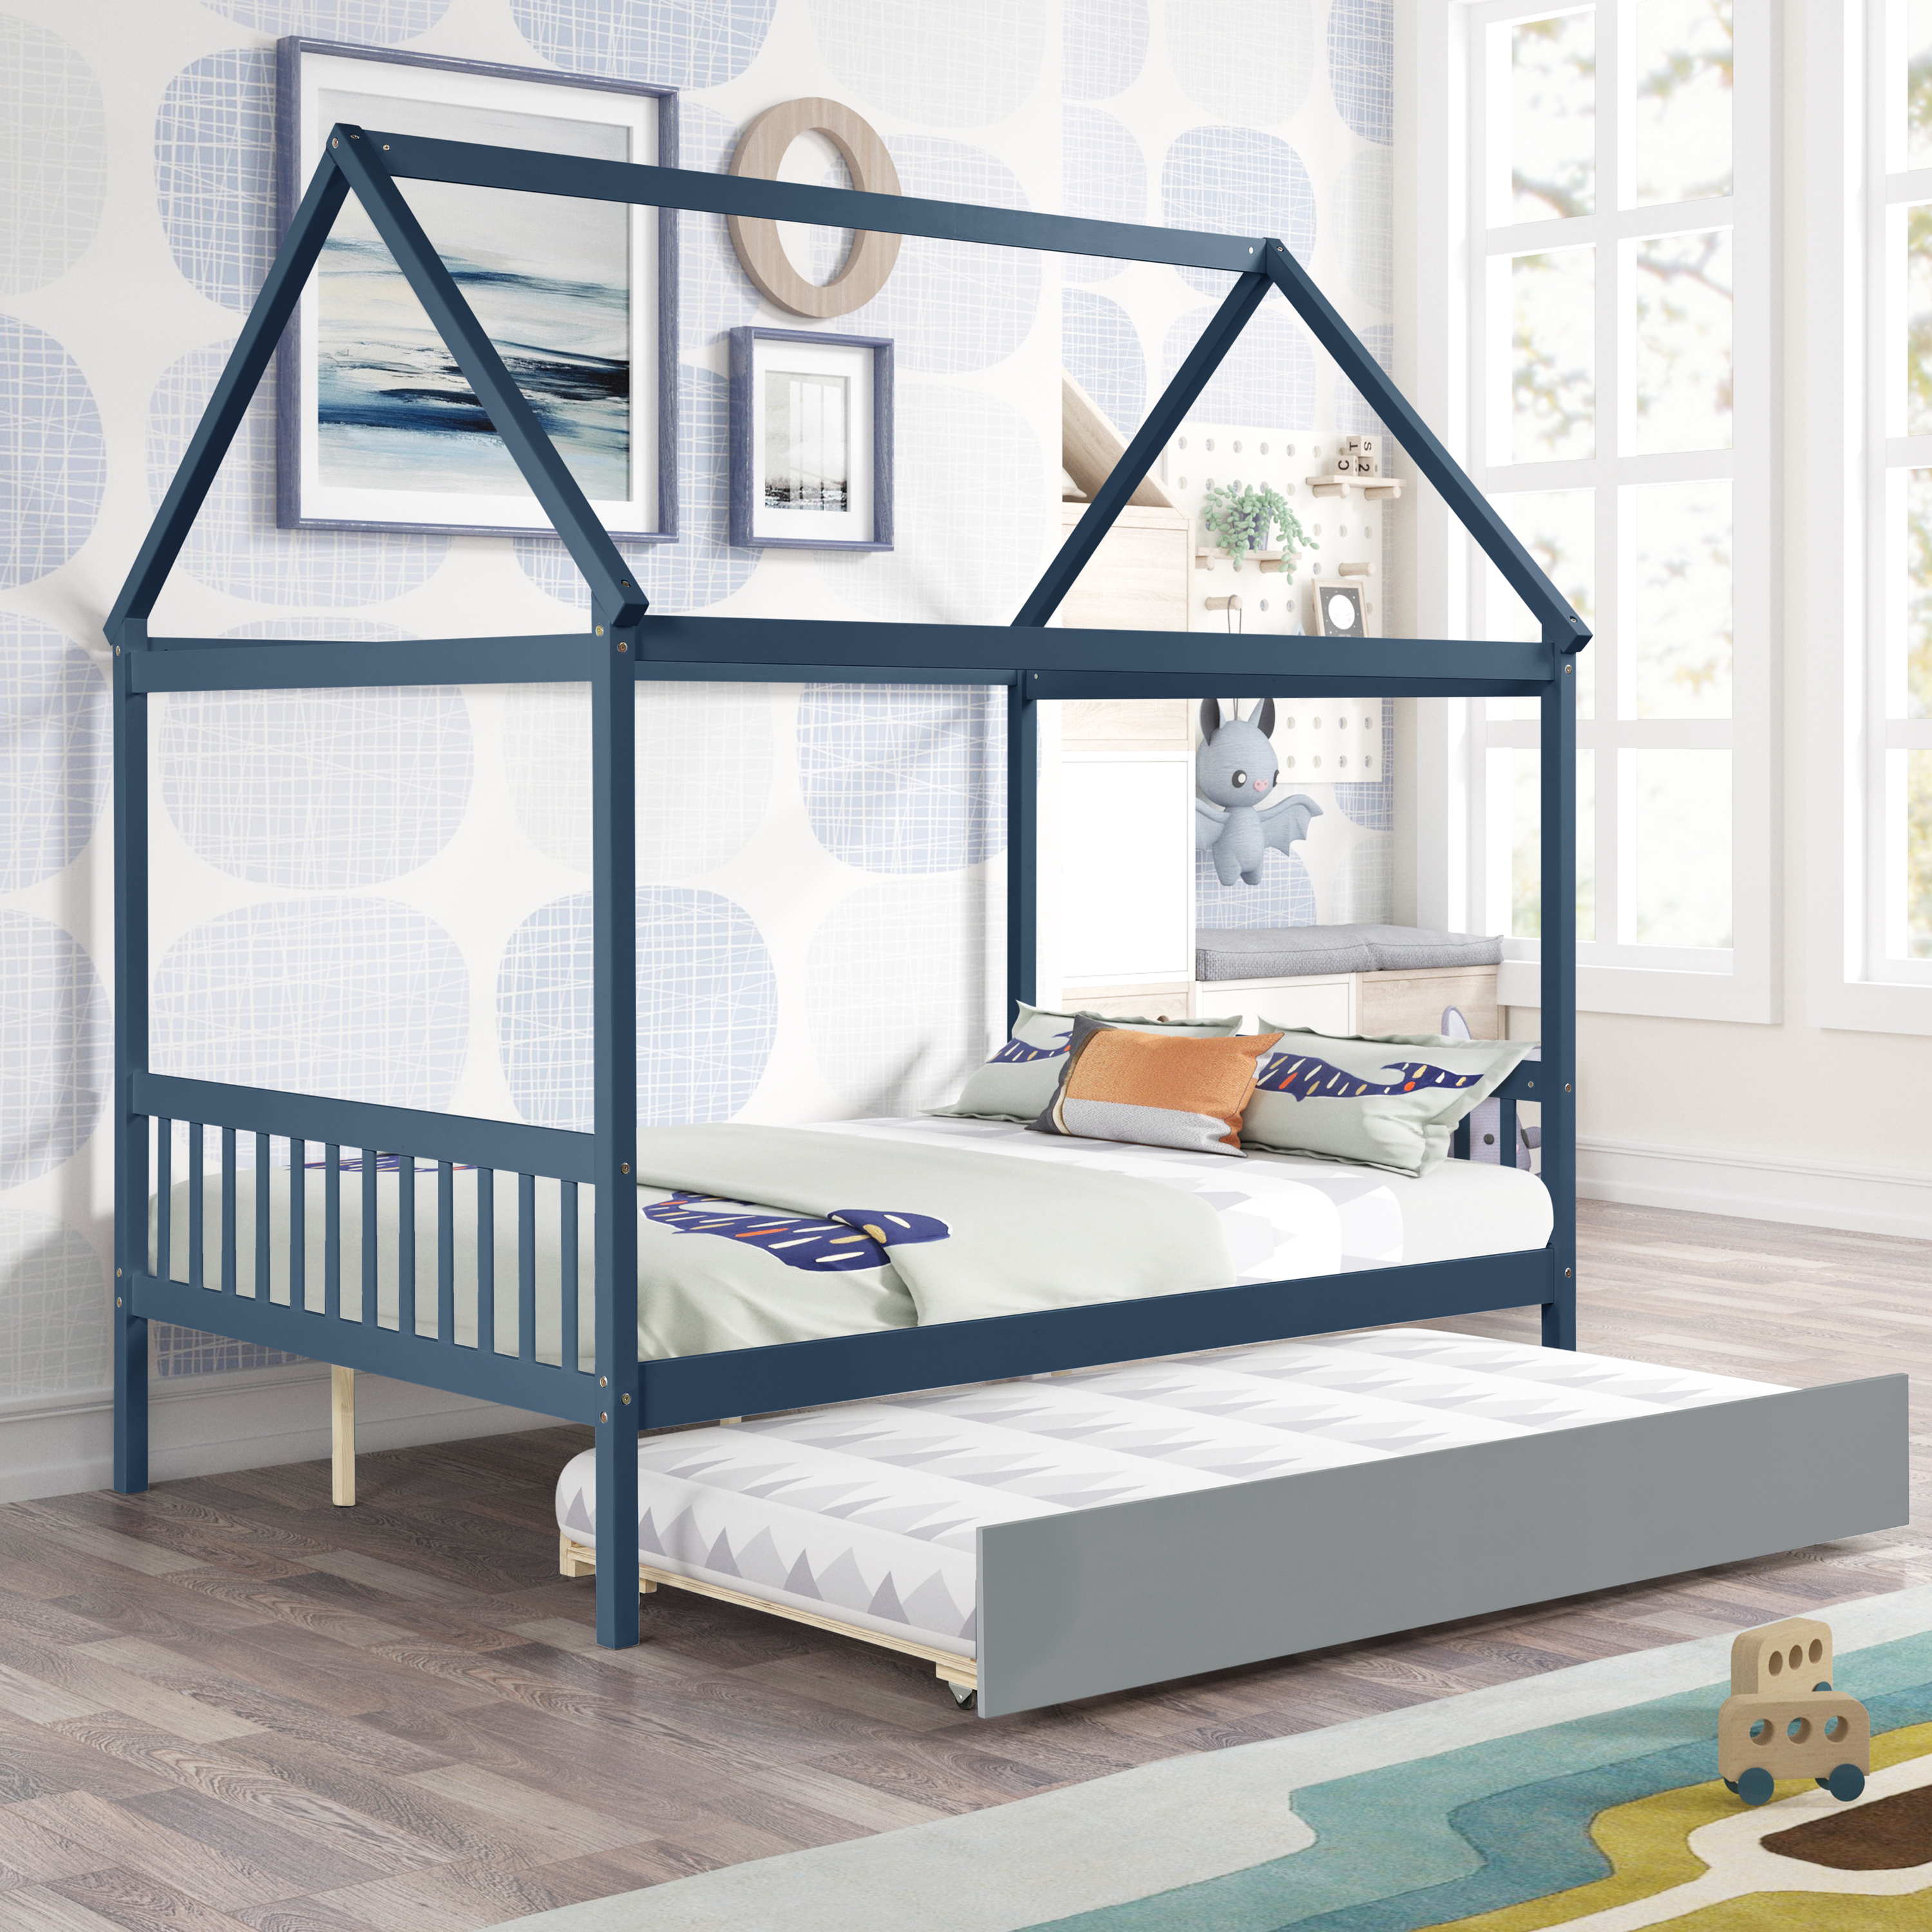 NAVY BLUE HOUSE FULL BED WITH GRAY TRUNDLE